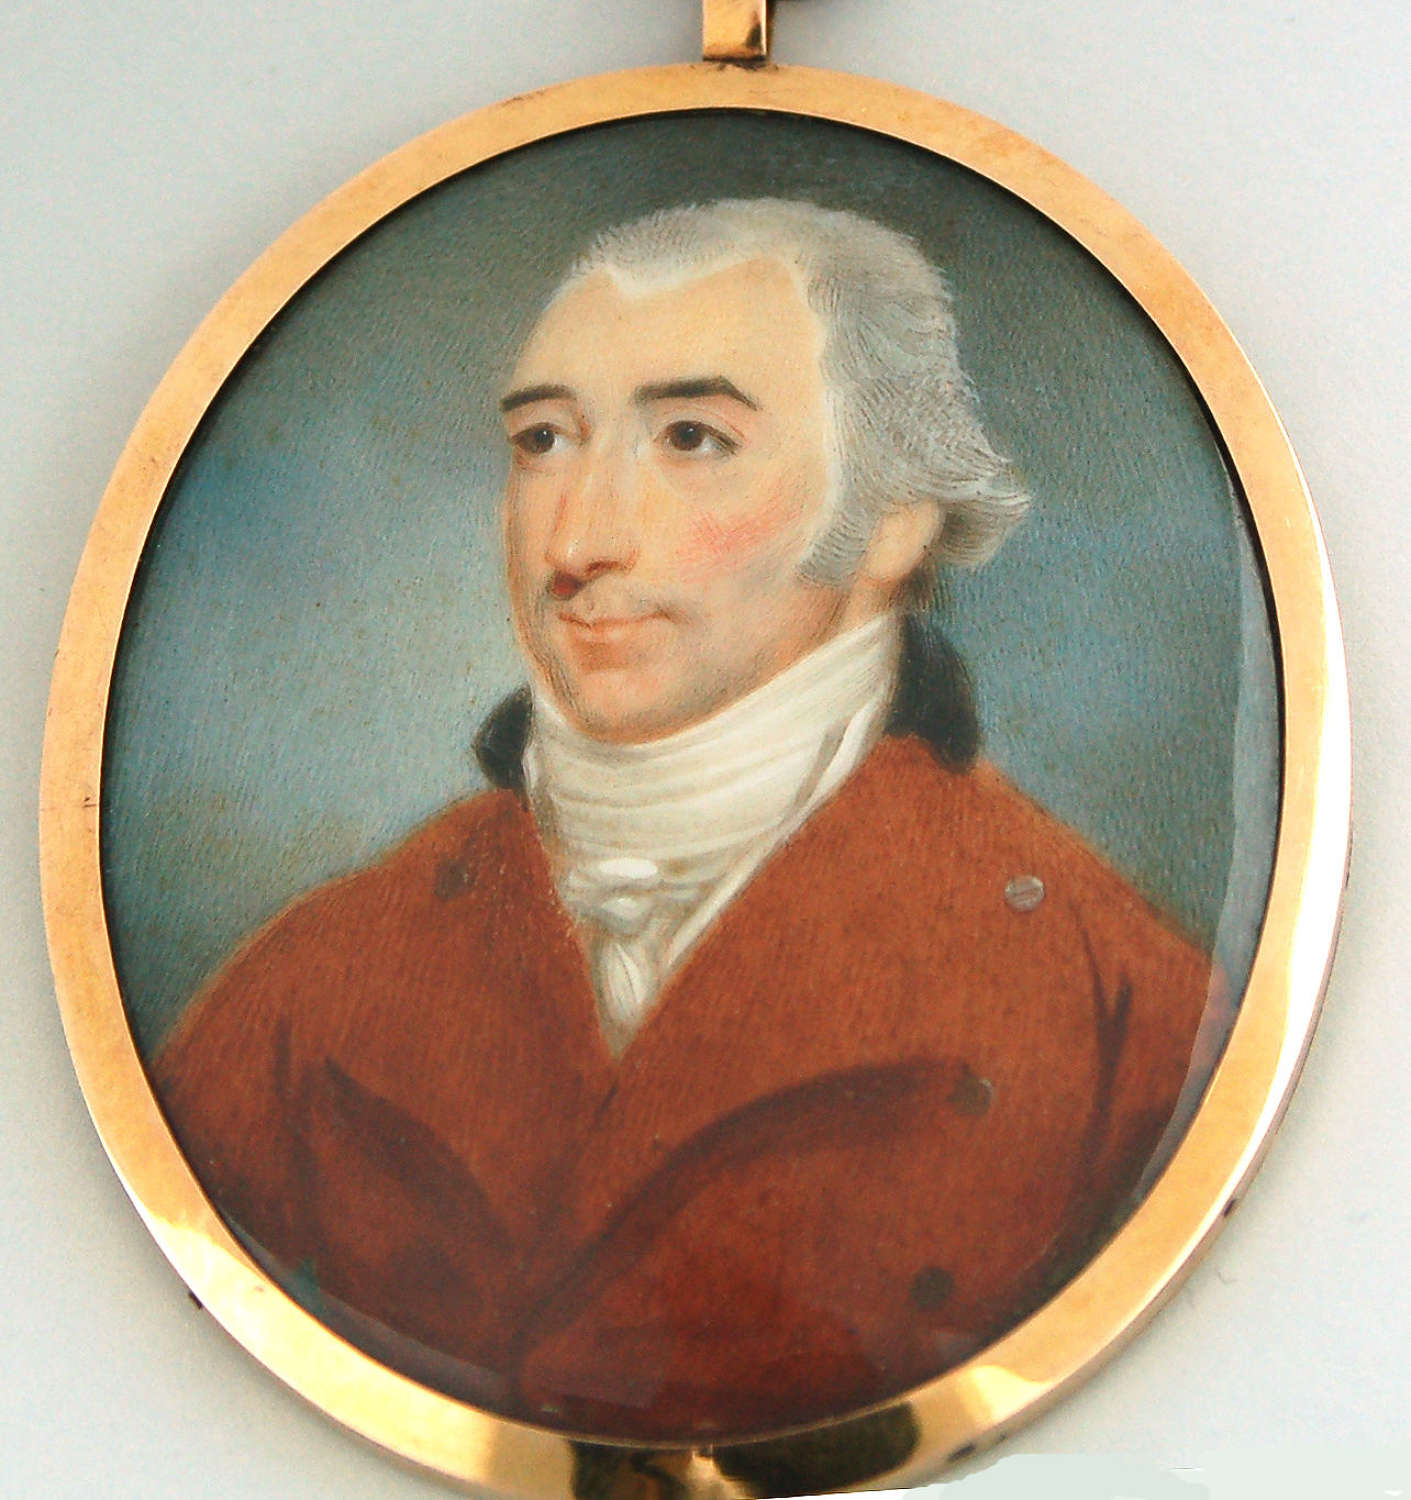 Miniature by Barry C1790